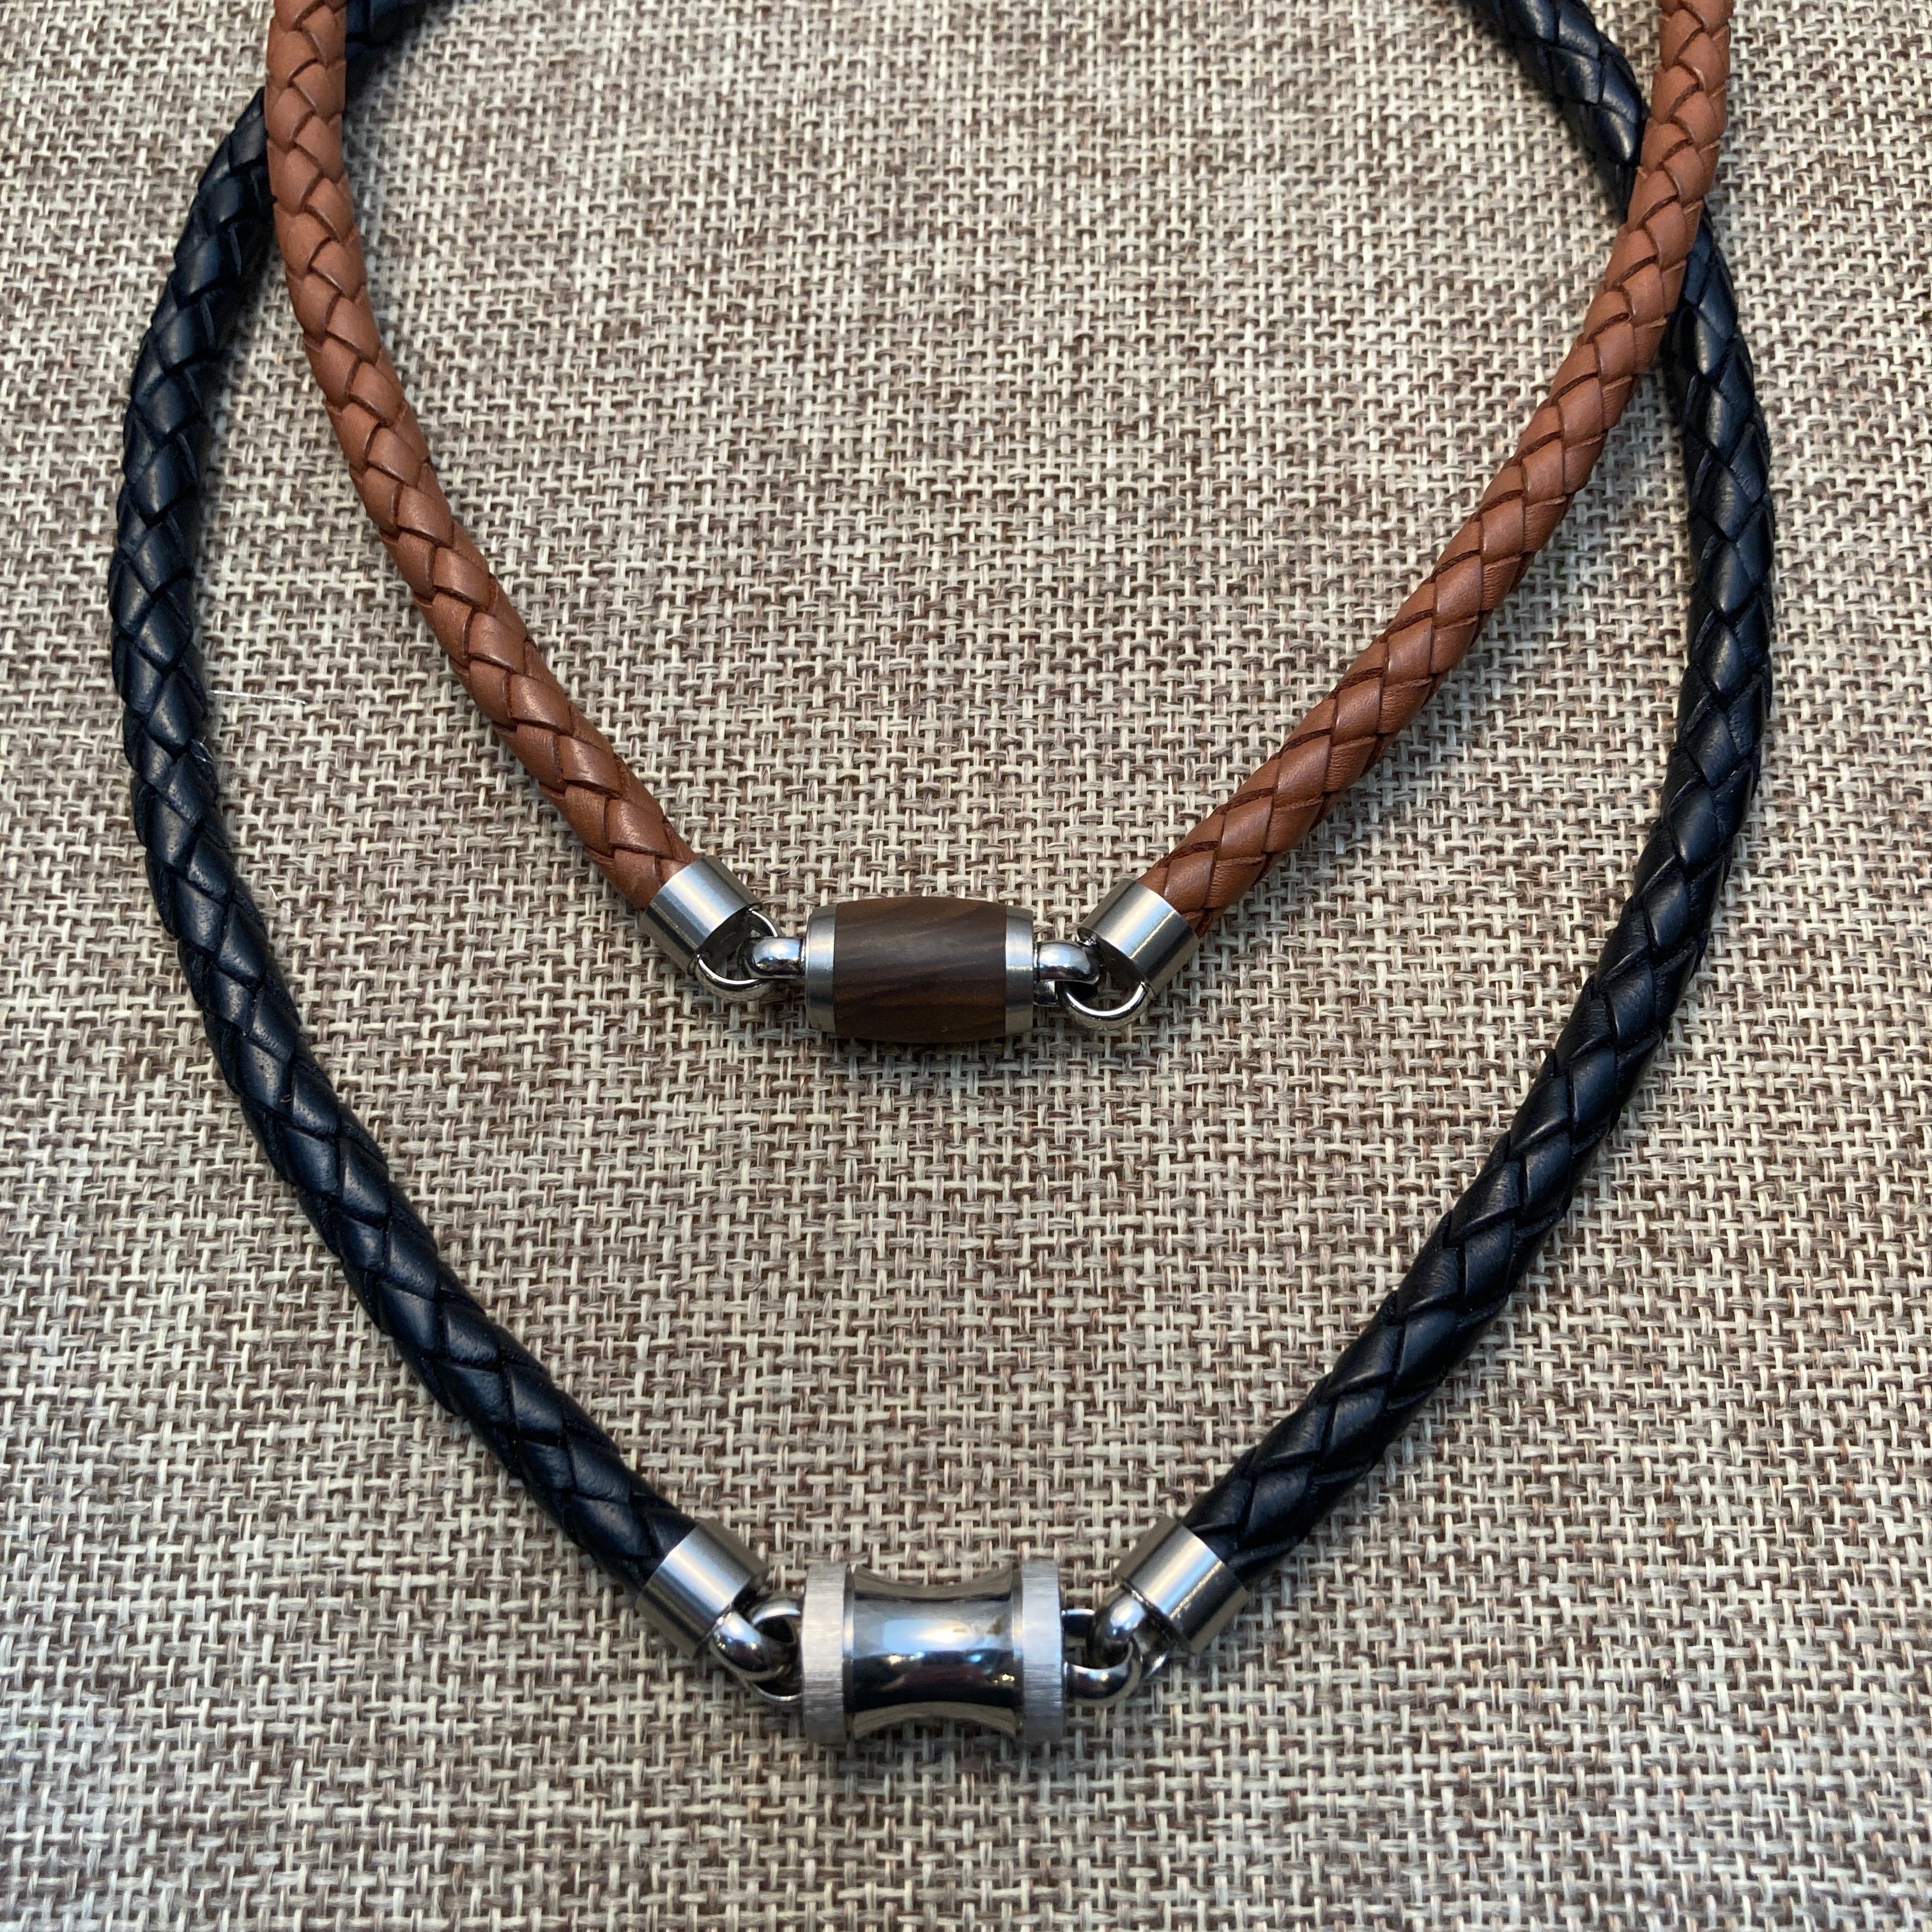 Brown Leather, Wood & Steel Necklace